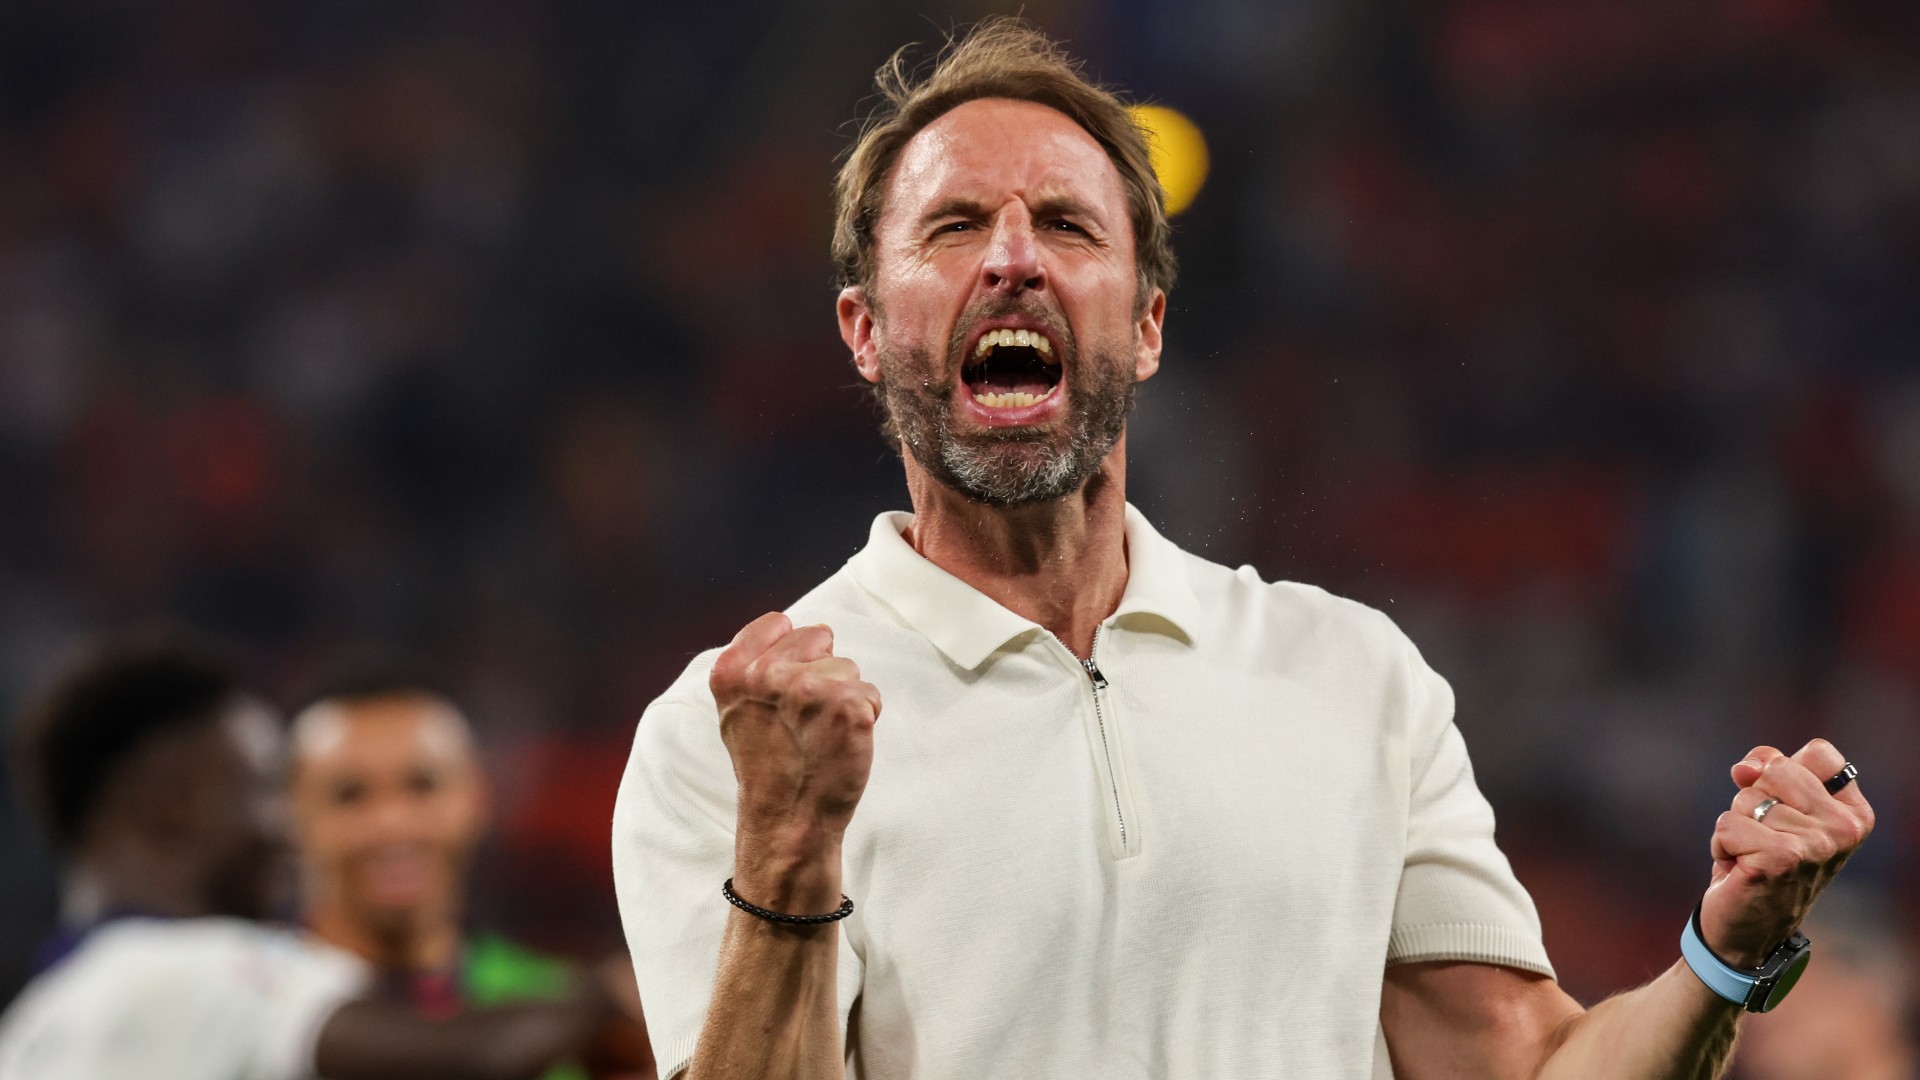 Southgate: We all want to be loved